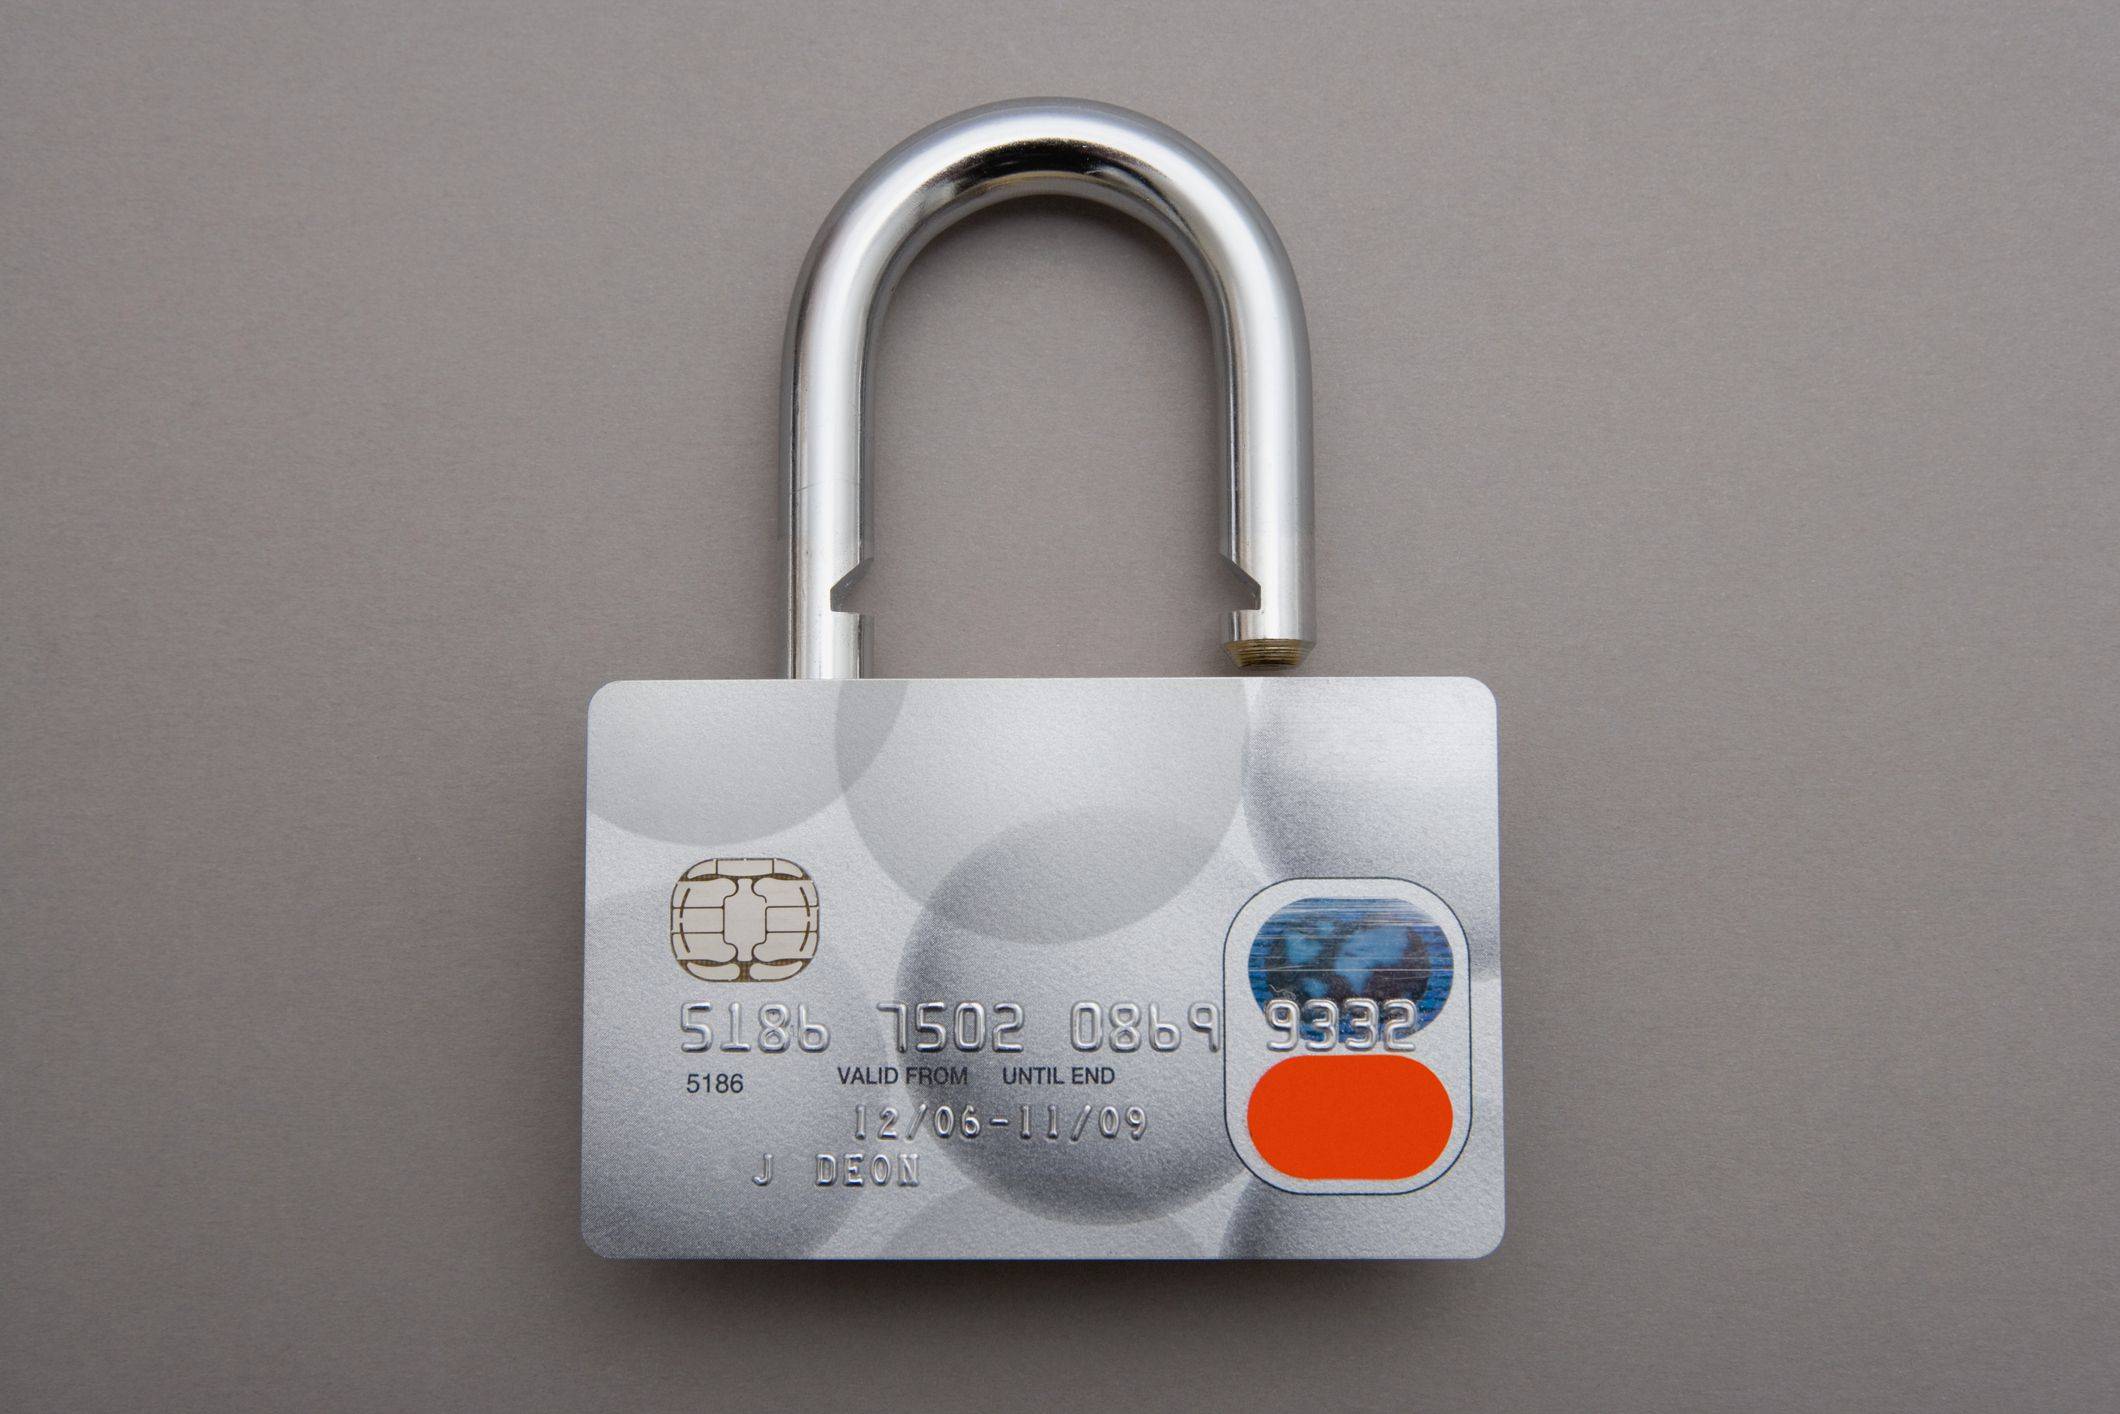 Why secure your credit card details